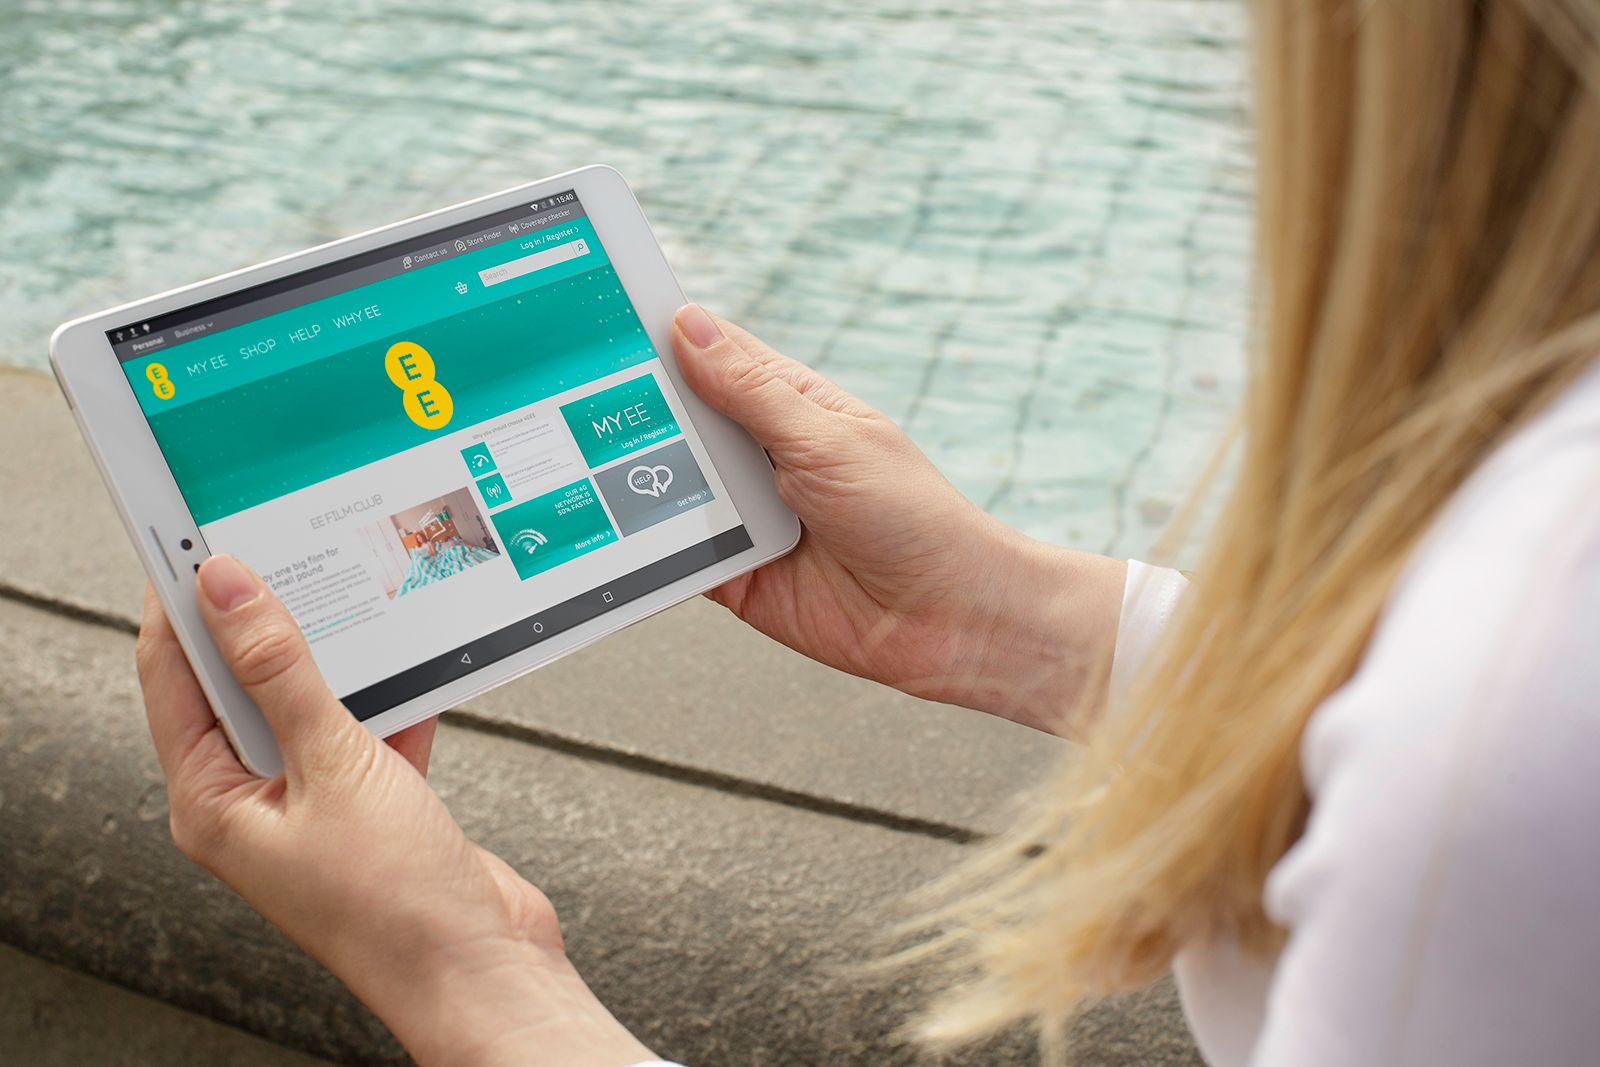 ee jay is a fun and budget friendly 4g tablet for summer travelling image 1